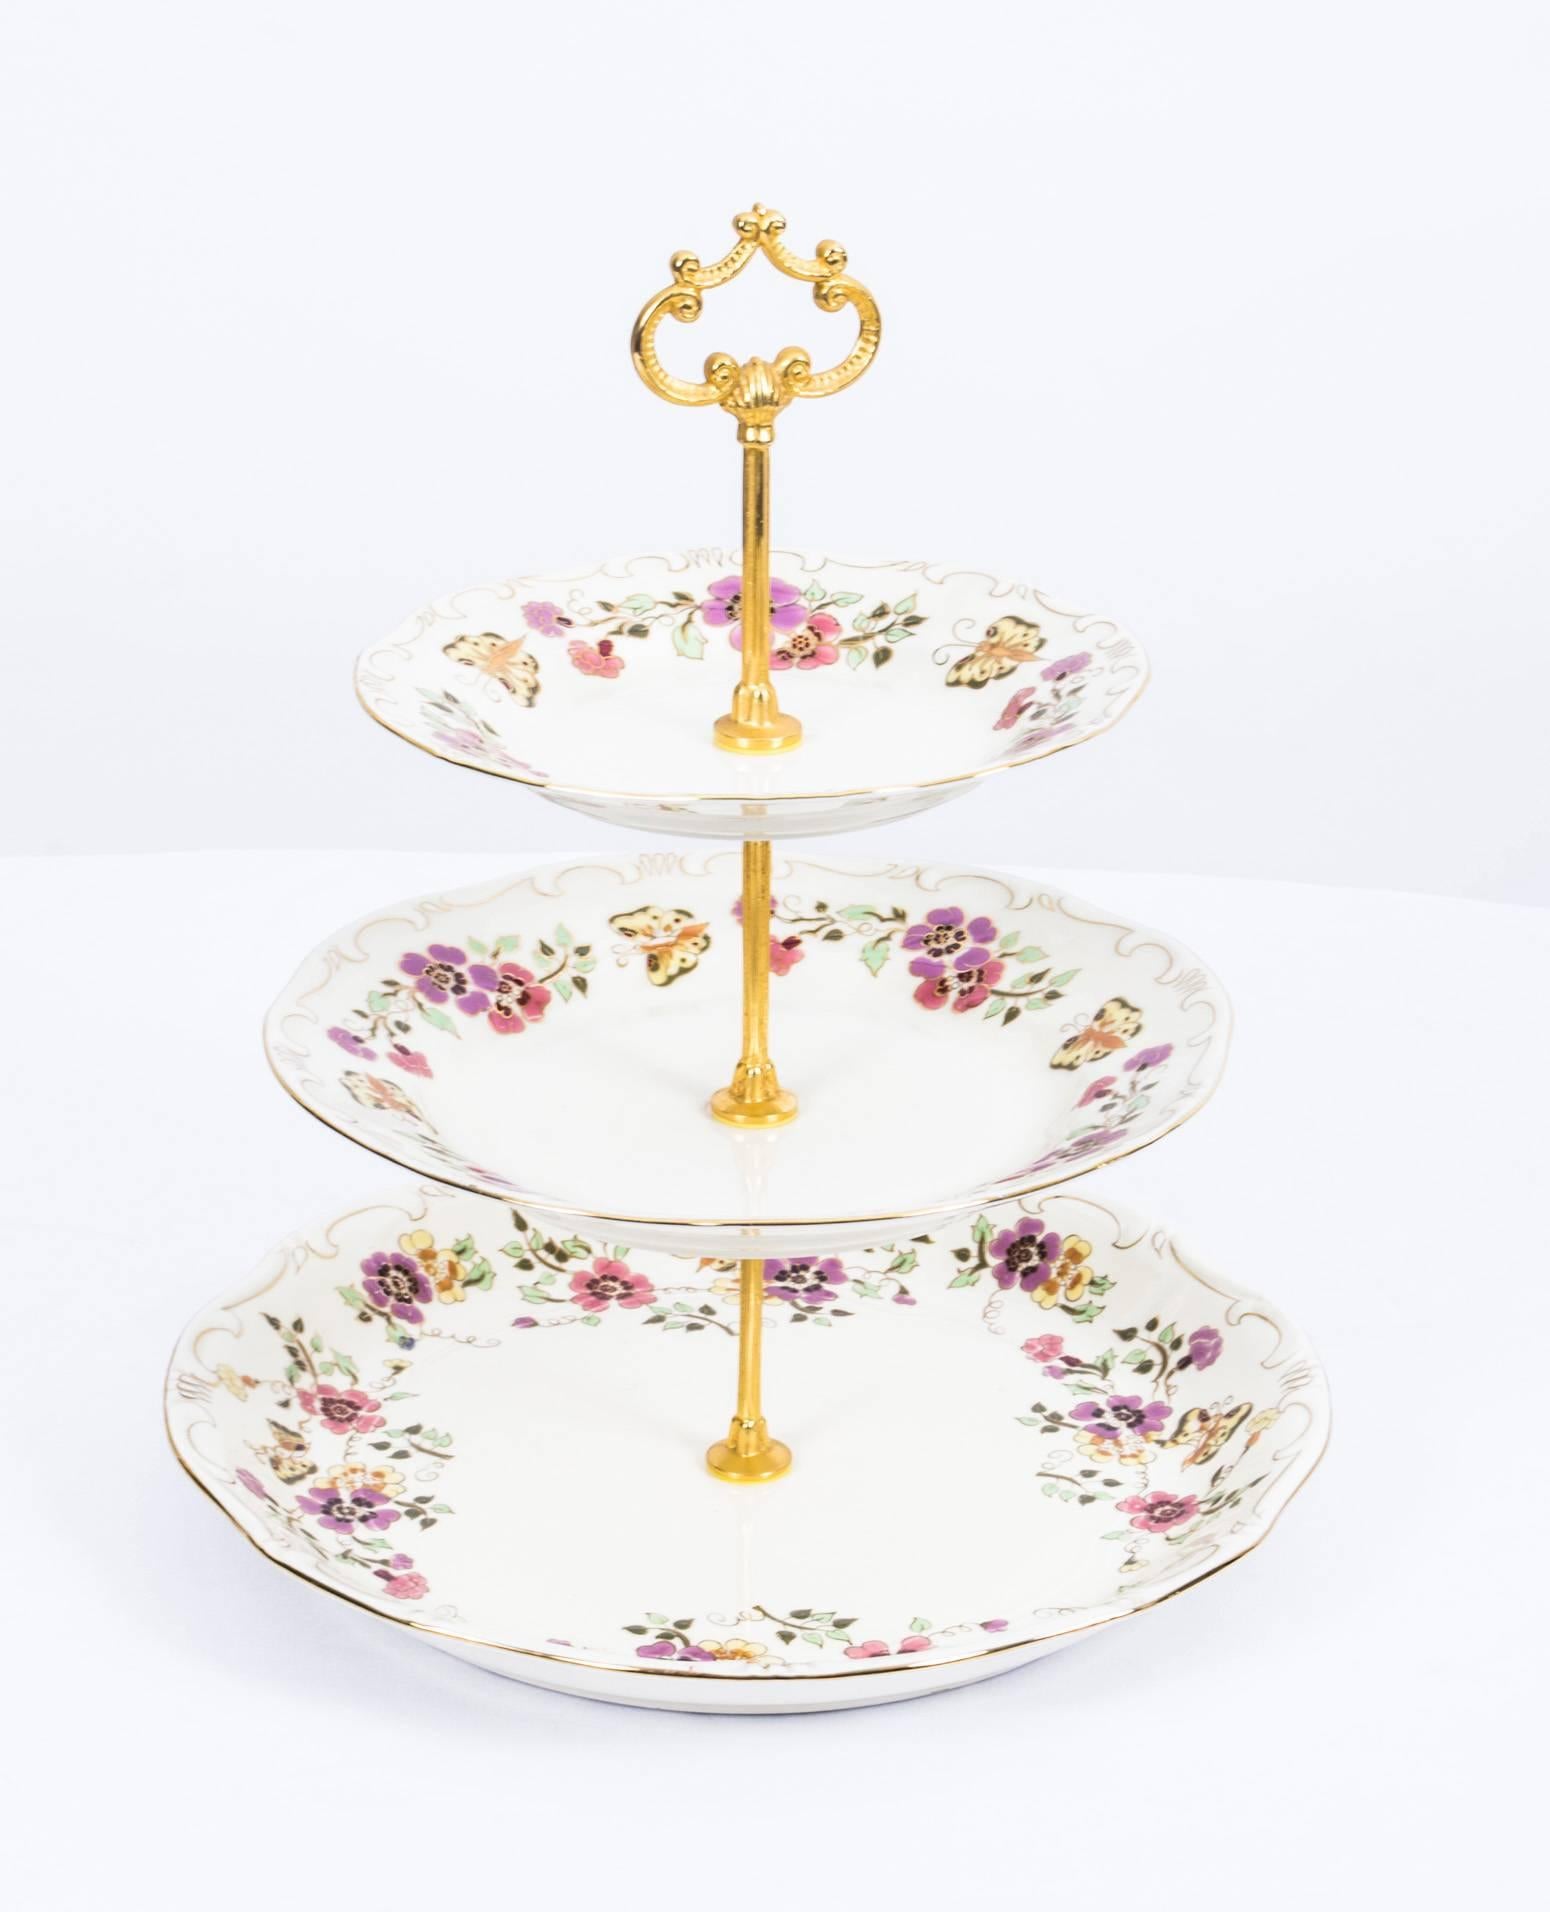 Hungarian Antique Extensive Zsolnay Porcelain Dinner Service for Eight, circa 1930